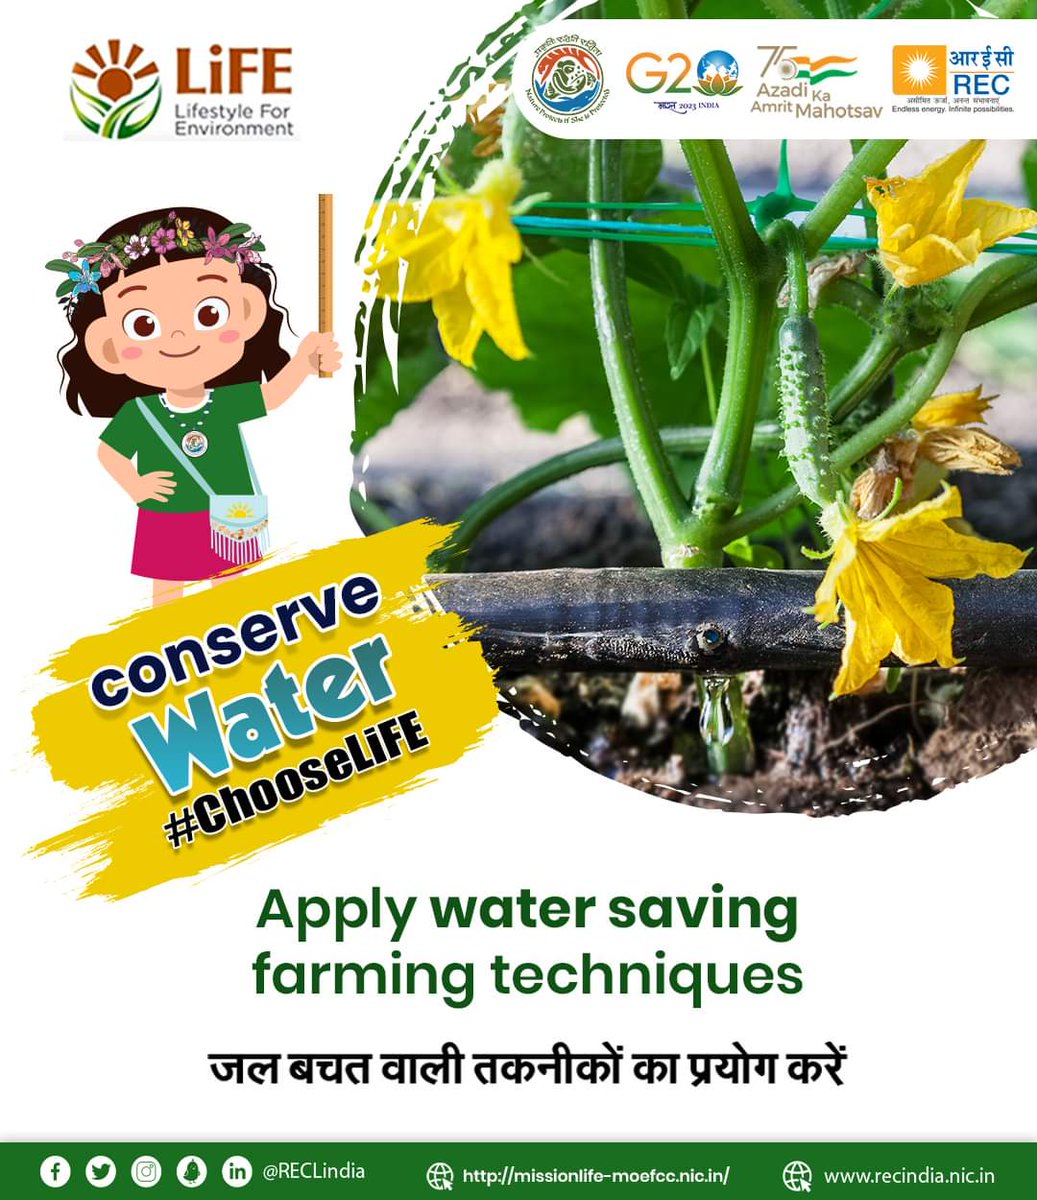 Find means to save water as much as possible!

#ChooseLiFE #MissionLiFE #ClimateAction4LiFE #JanBhagidari #RECLimited #REC #RECLindia #SustainableConsumption #GreenEnergy #PowerSector #CSRinitiatives #SustainableGrowth #EnvironmentalSustainability #RuralInfrastructure…